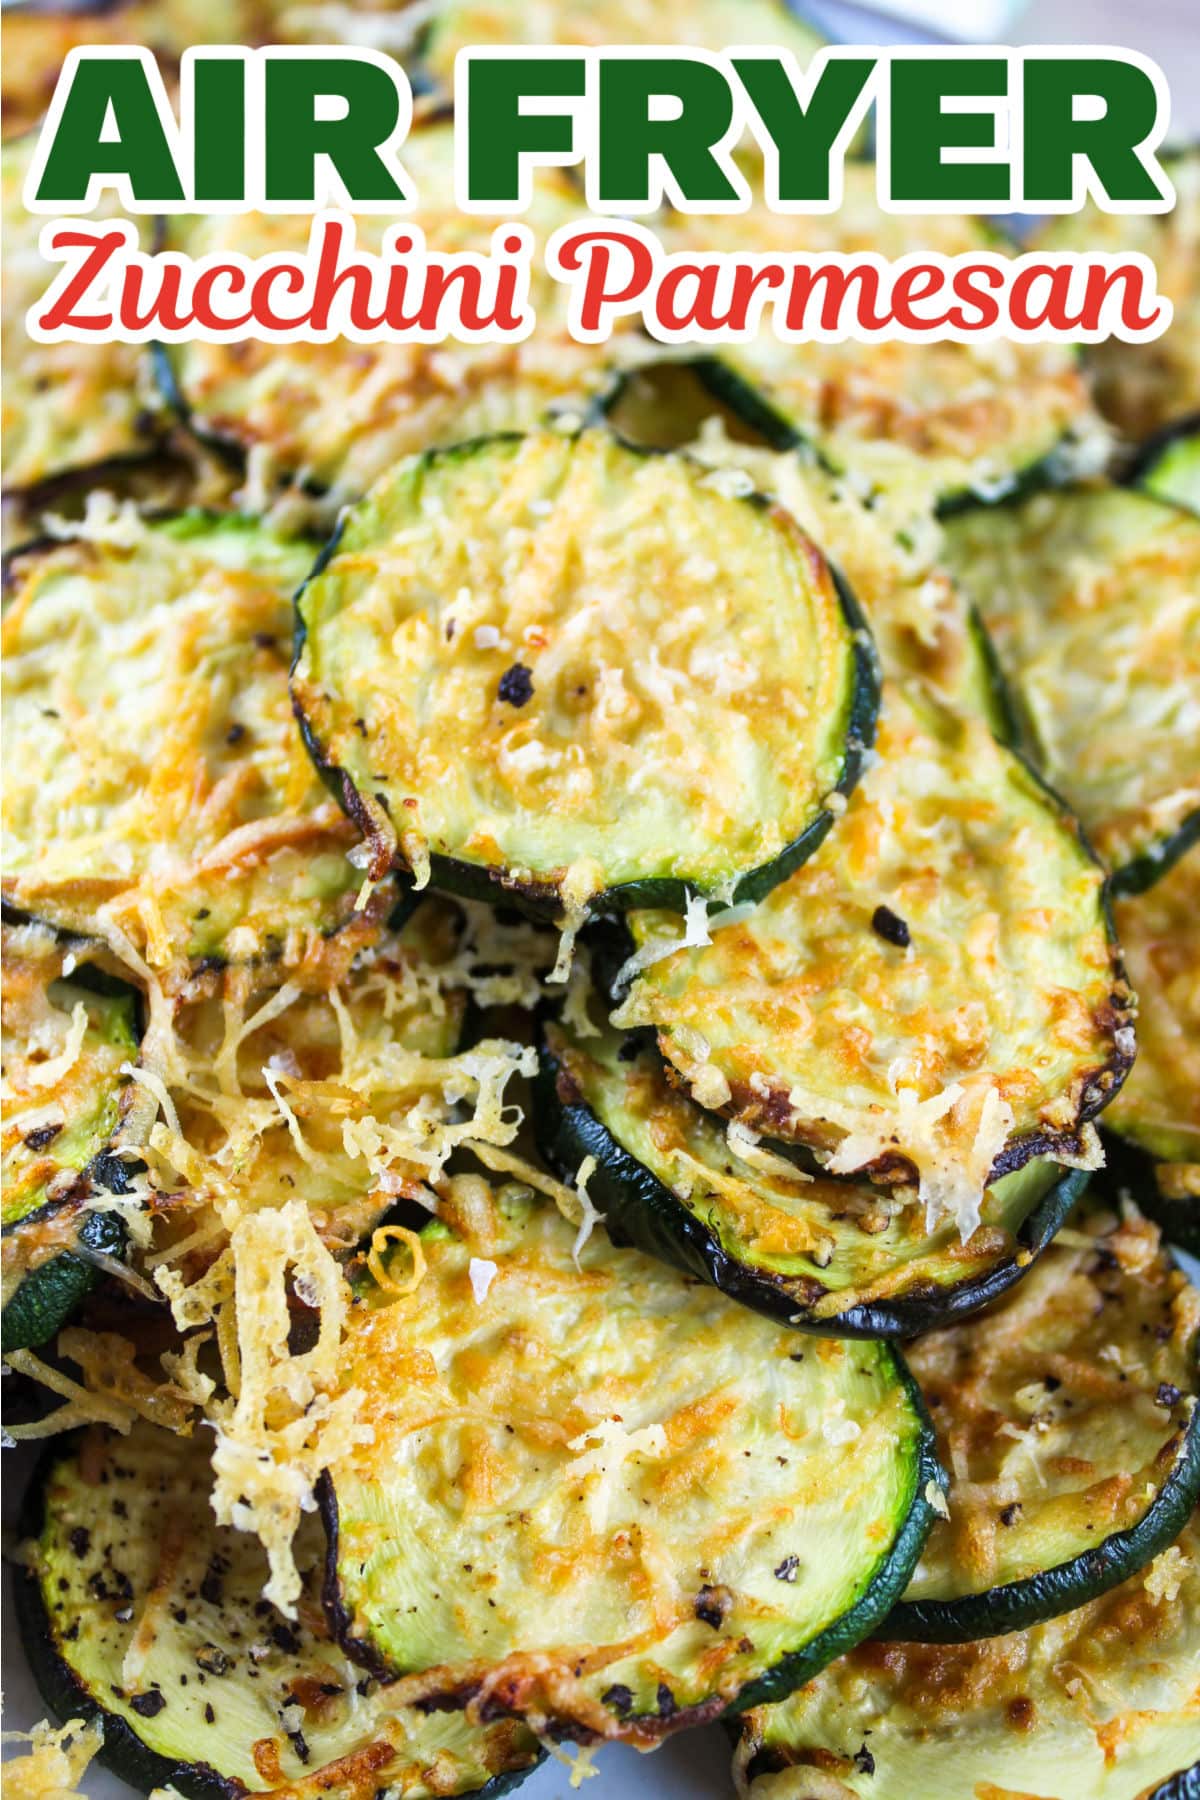 Air Fryer Zucchini Parmesan is a super quick (and guilt-free) side dish that changes zucchini from bland to delicious! These little zucchini crisps are crunchy, cheesy and zippy from a little brush of dijon mustard.  via @foodhussy